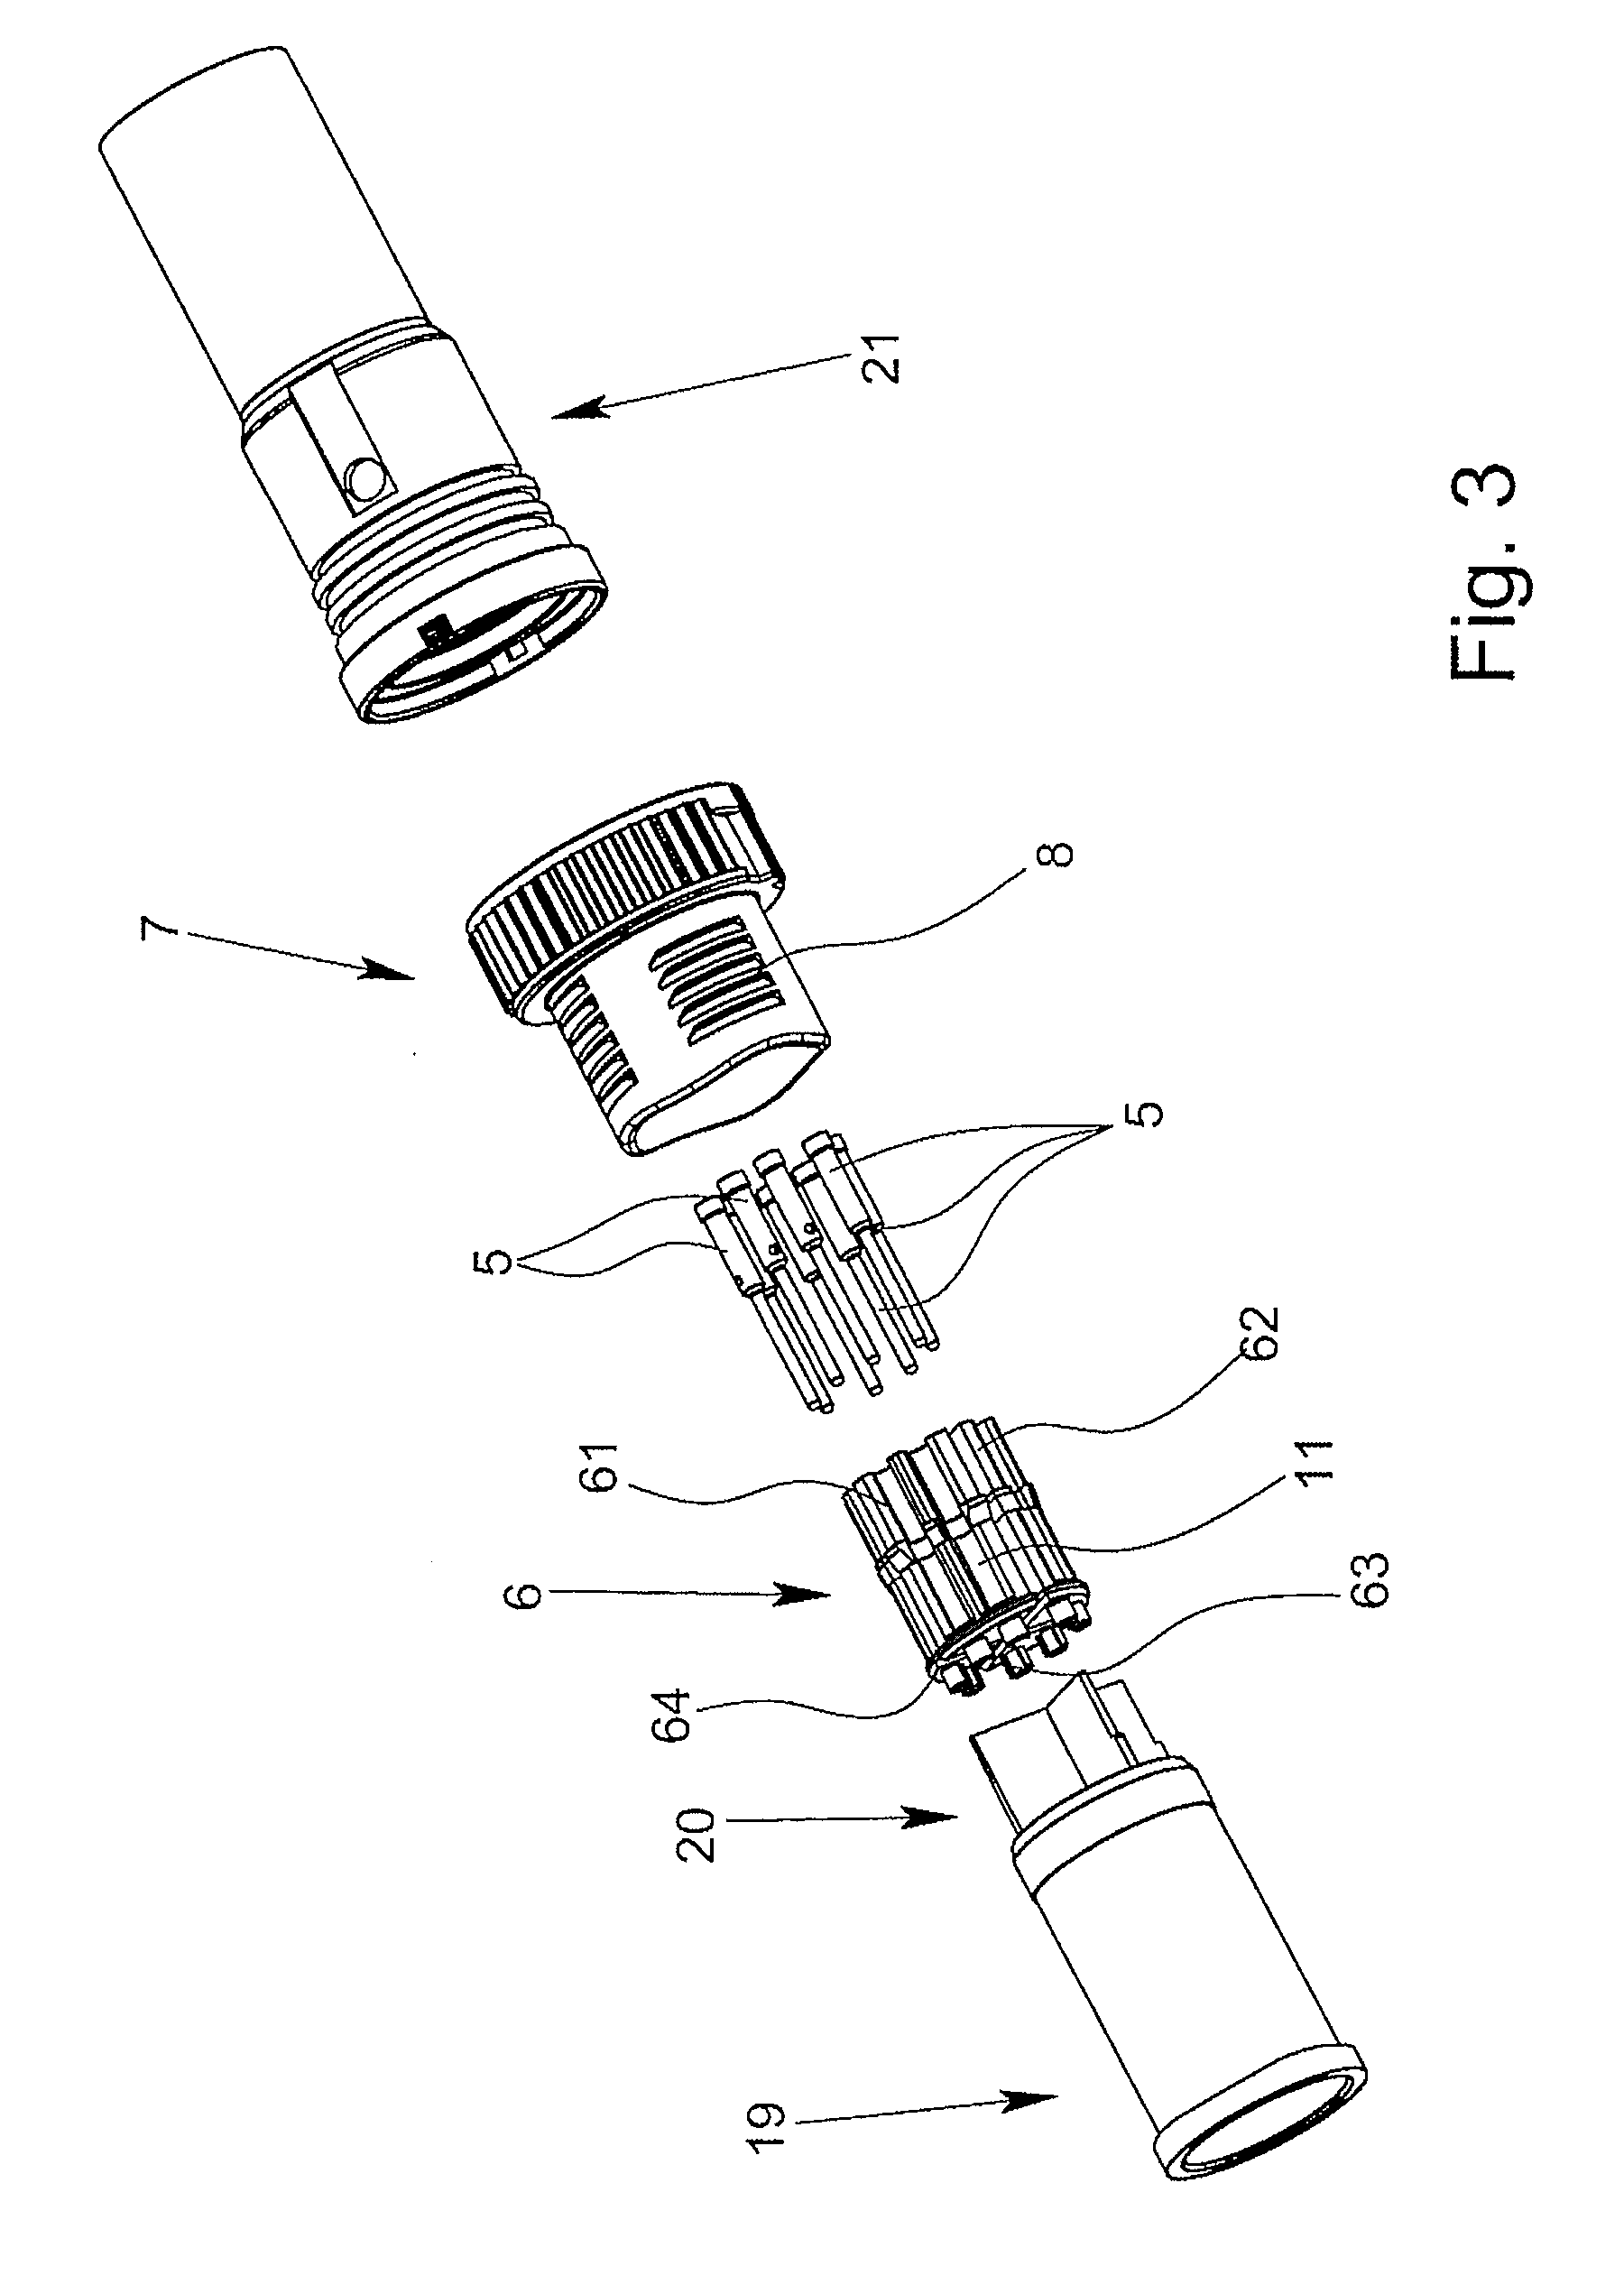 Electrical plug-in connector and electrical plug-in connection